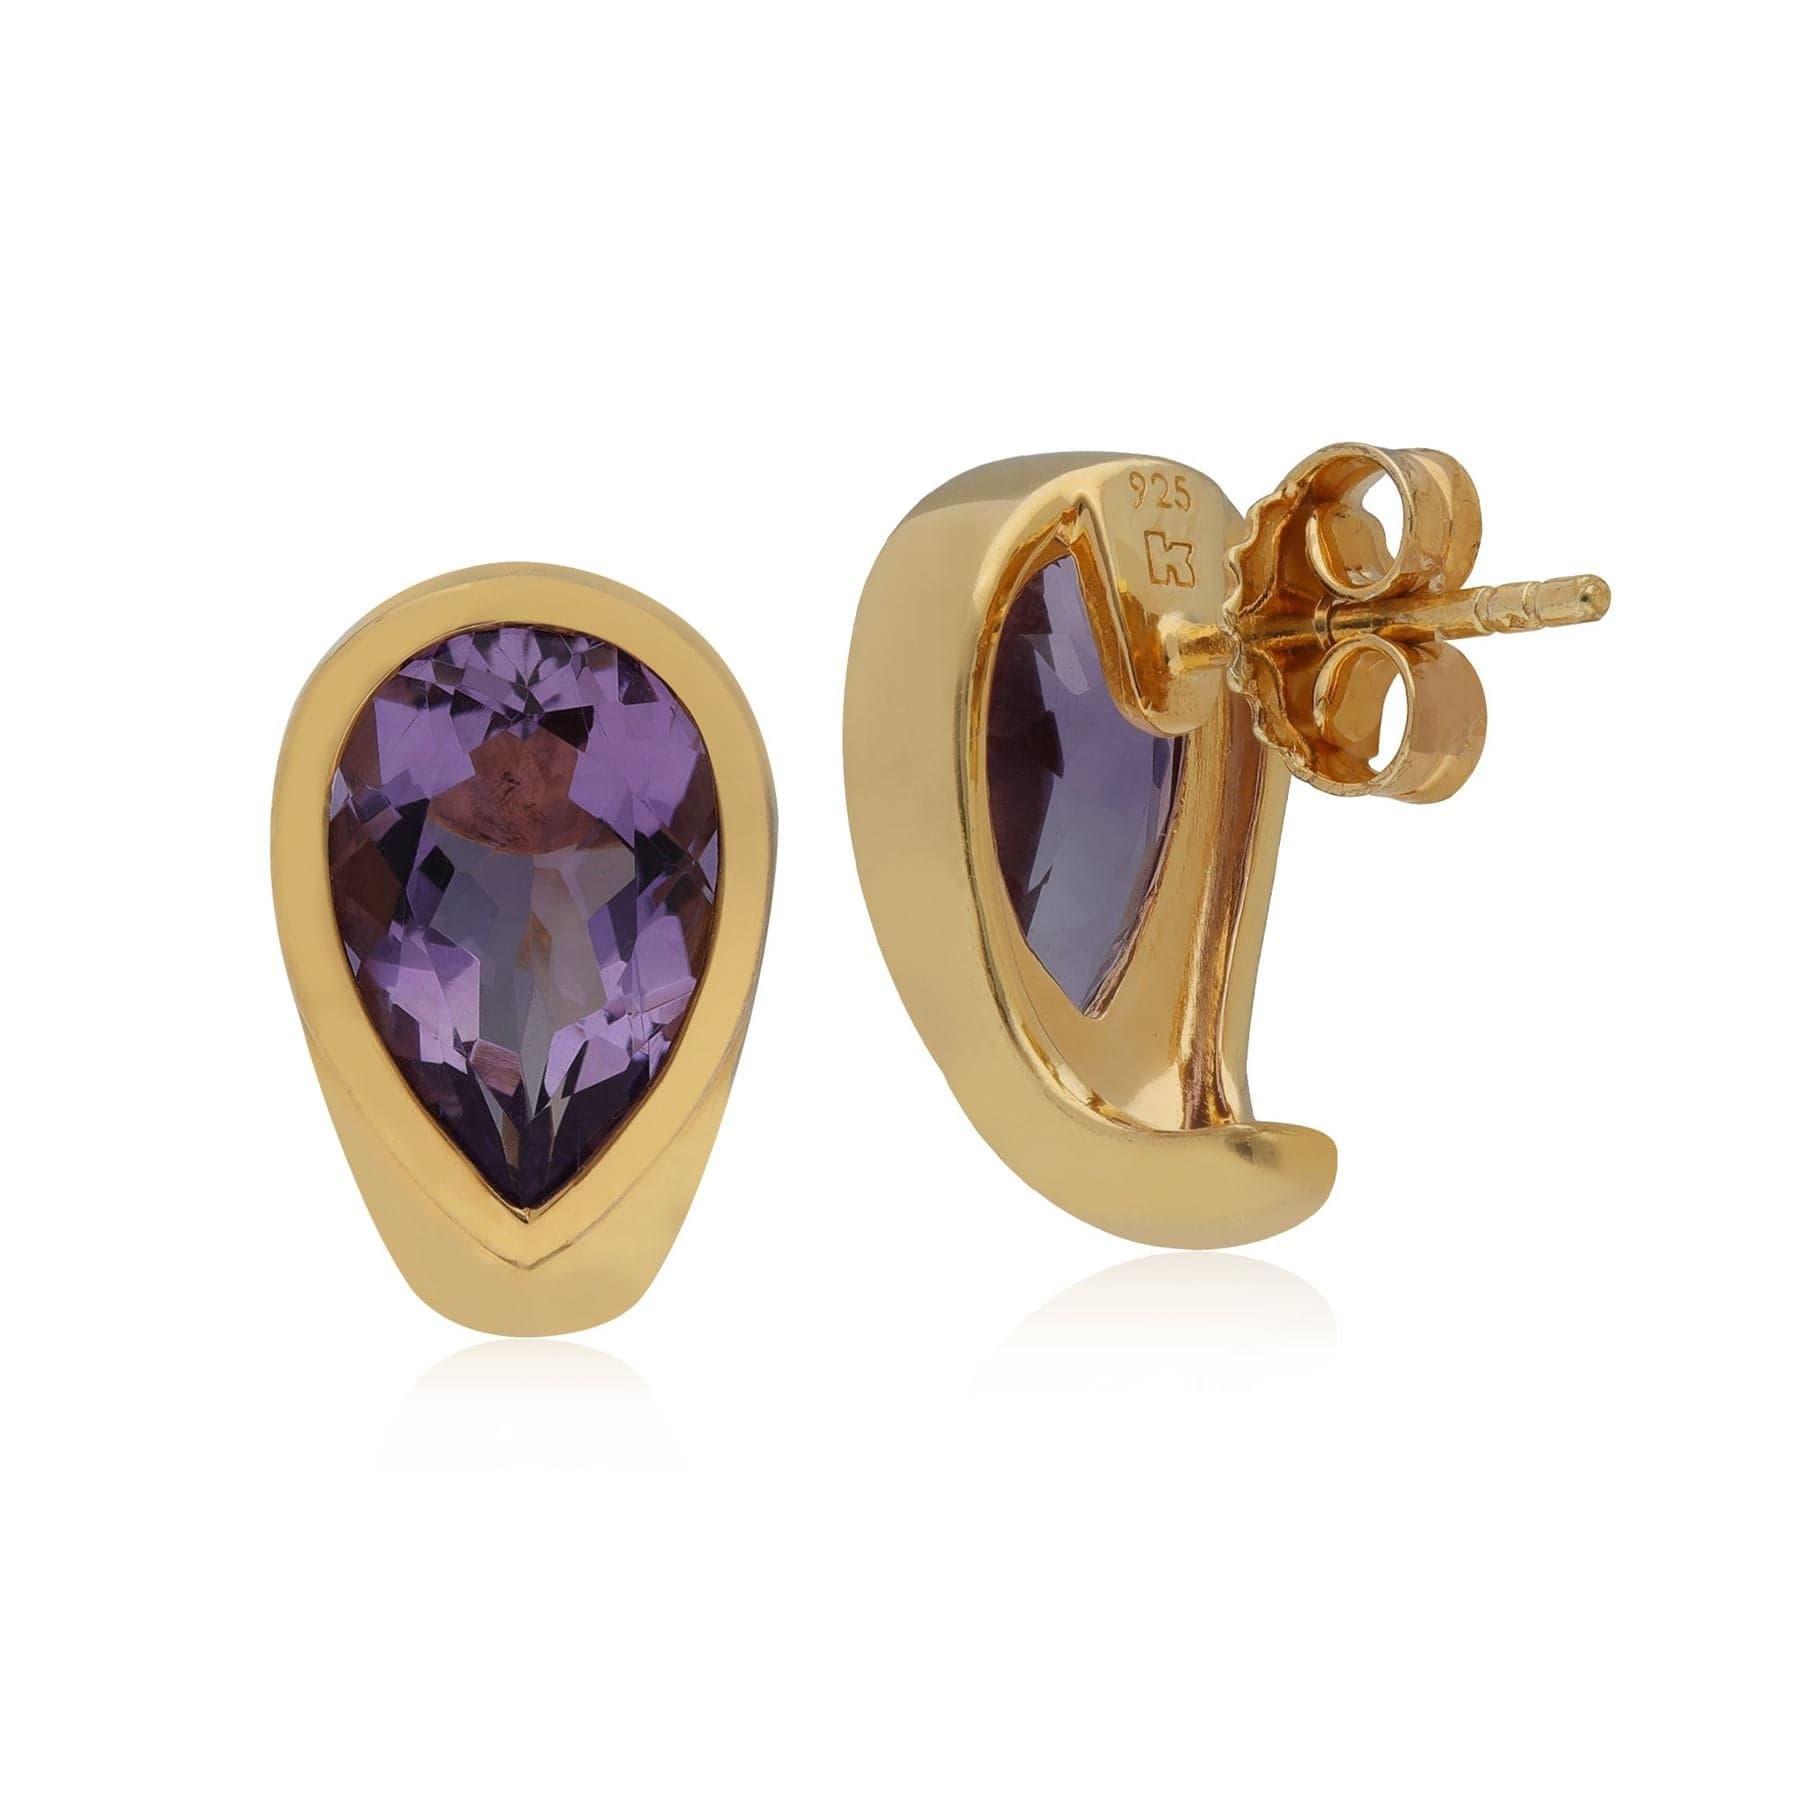 T1037E9011 Kosmos Amethyst Earrings in Yellow Gold Plated Sterling Silver 2